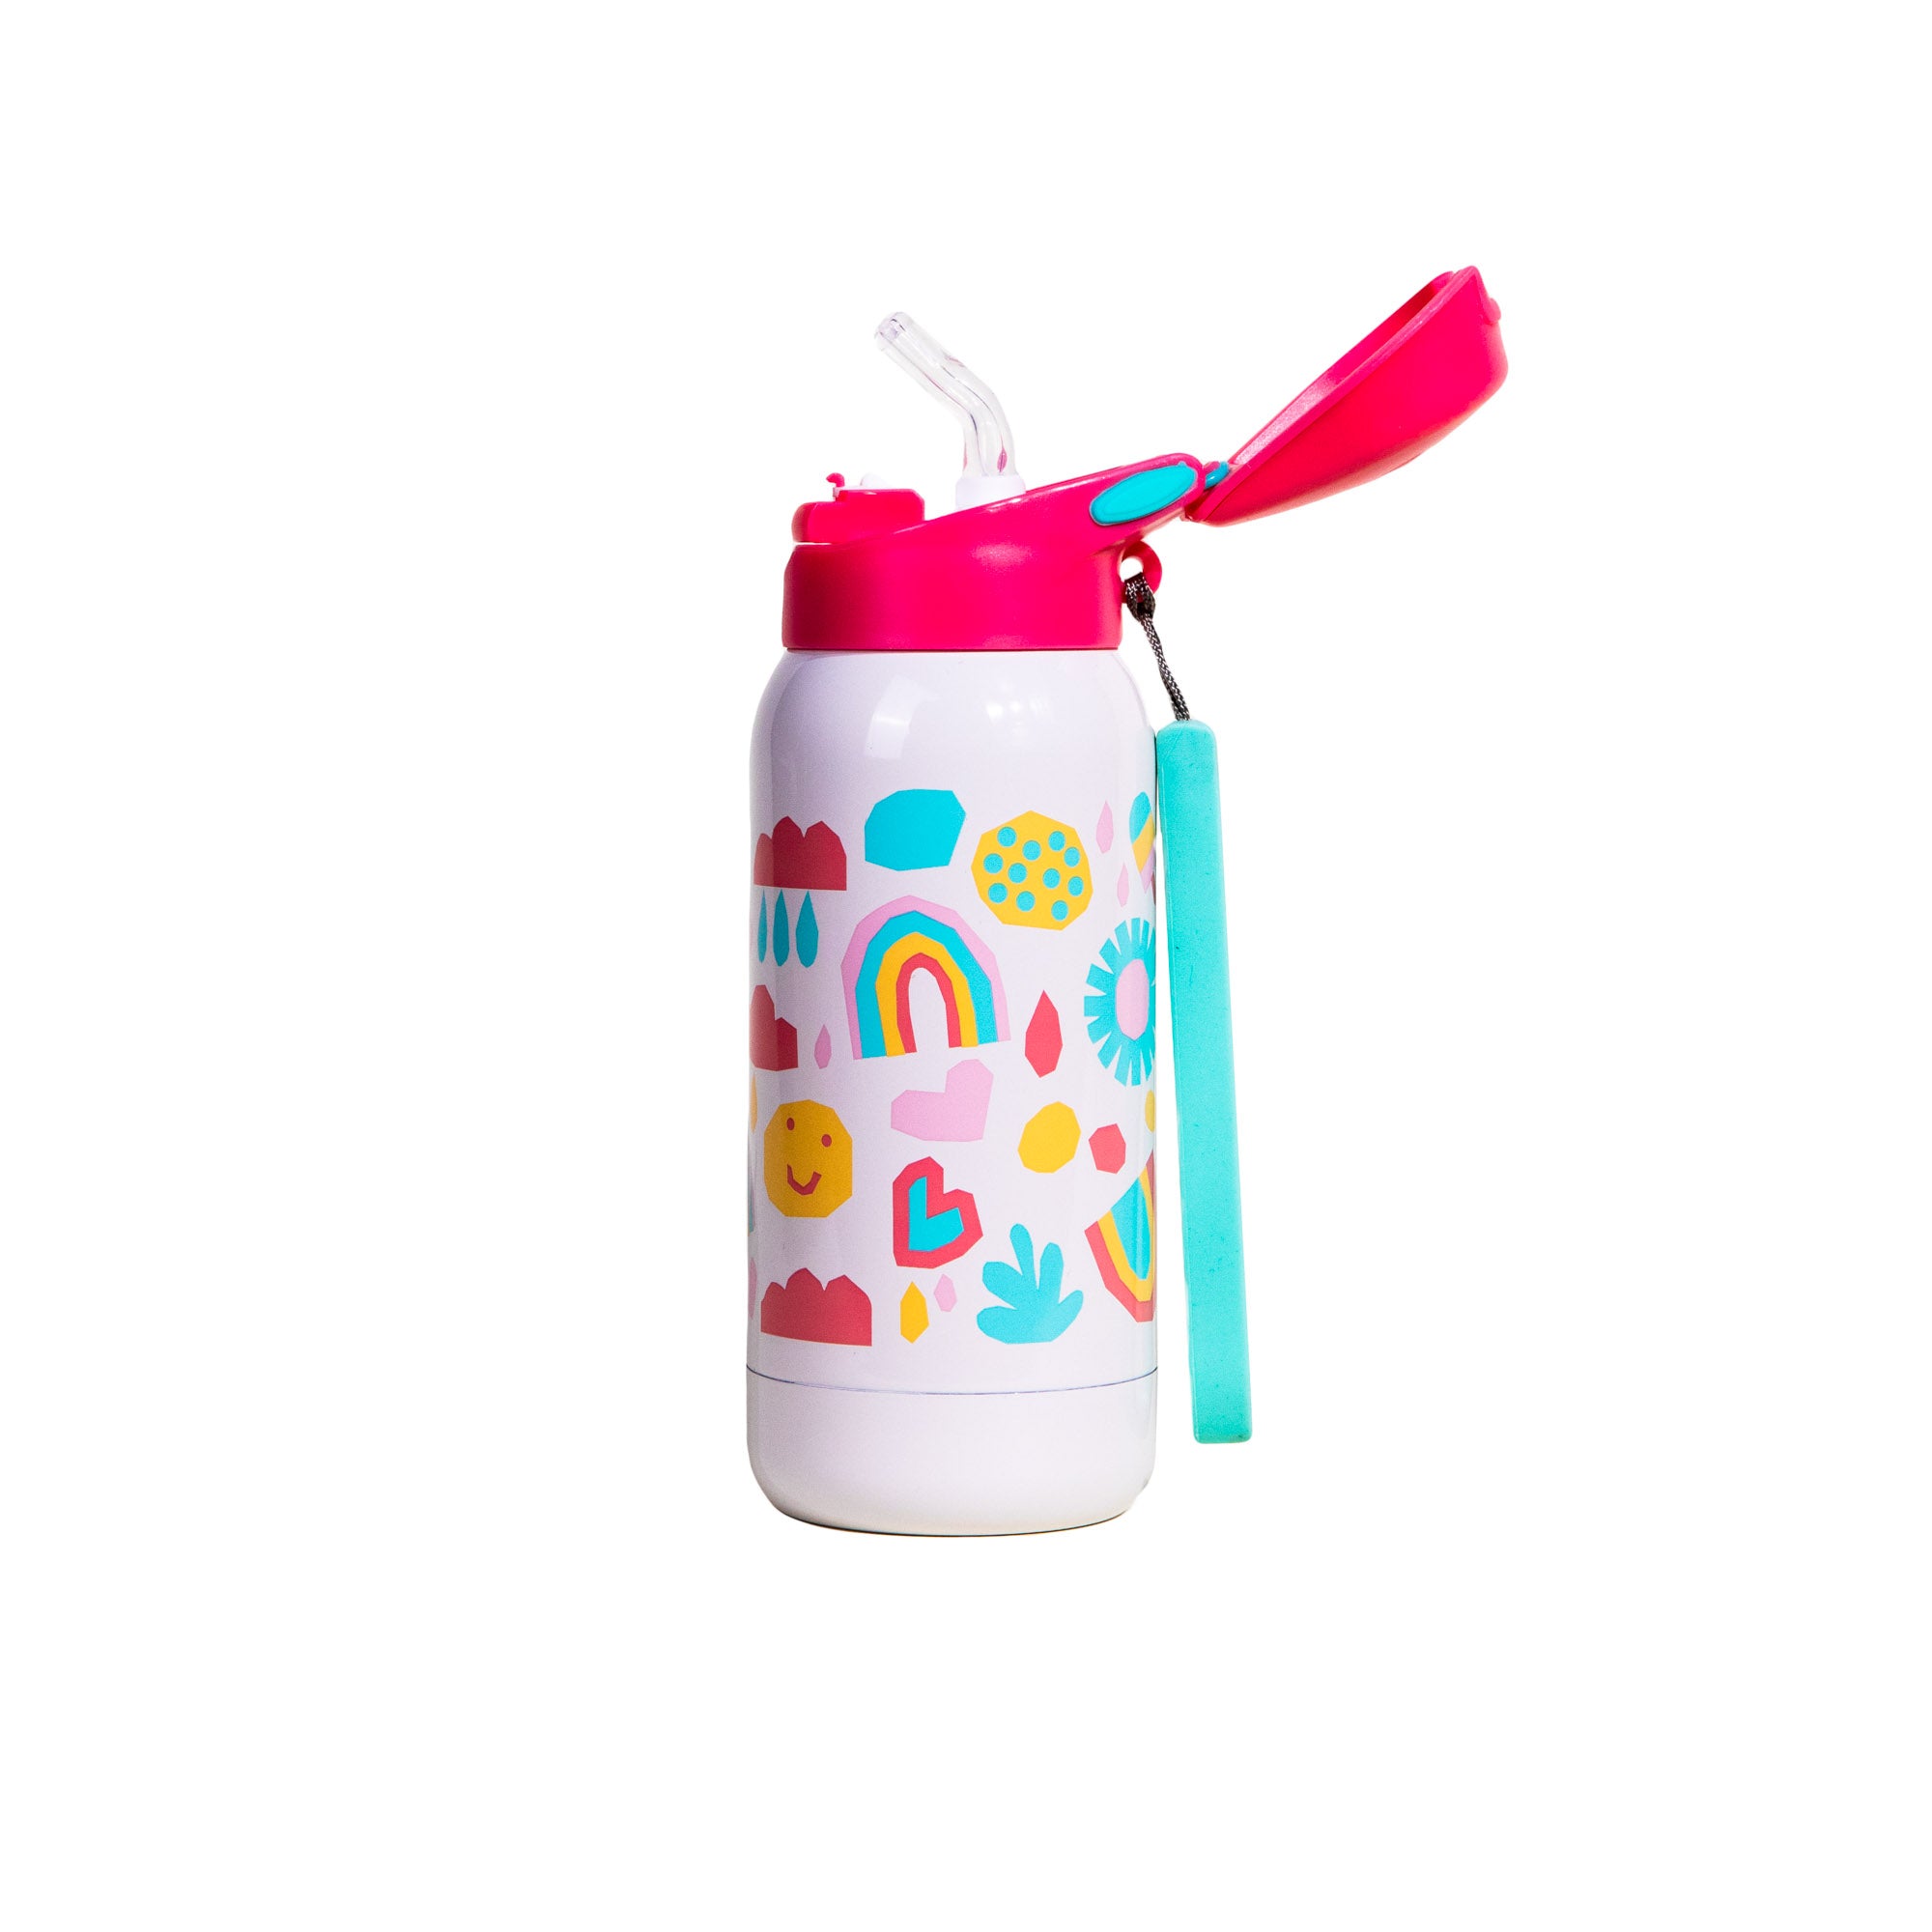 https://cdn.shopify.com/s/files/1/0569/0041/9738/products/68199_CAMP_KidWaterBottle_Cream_Rainbows-2.jpg?v=1675102154